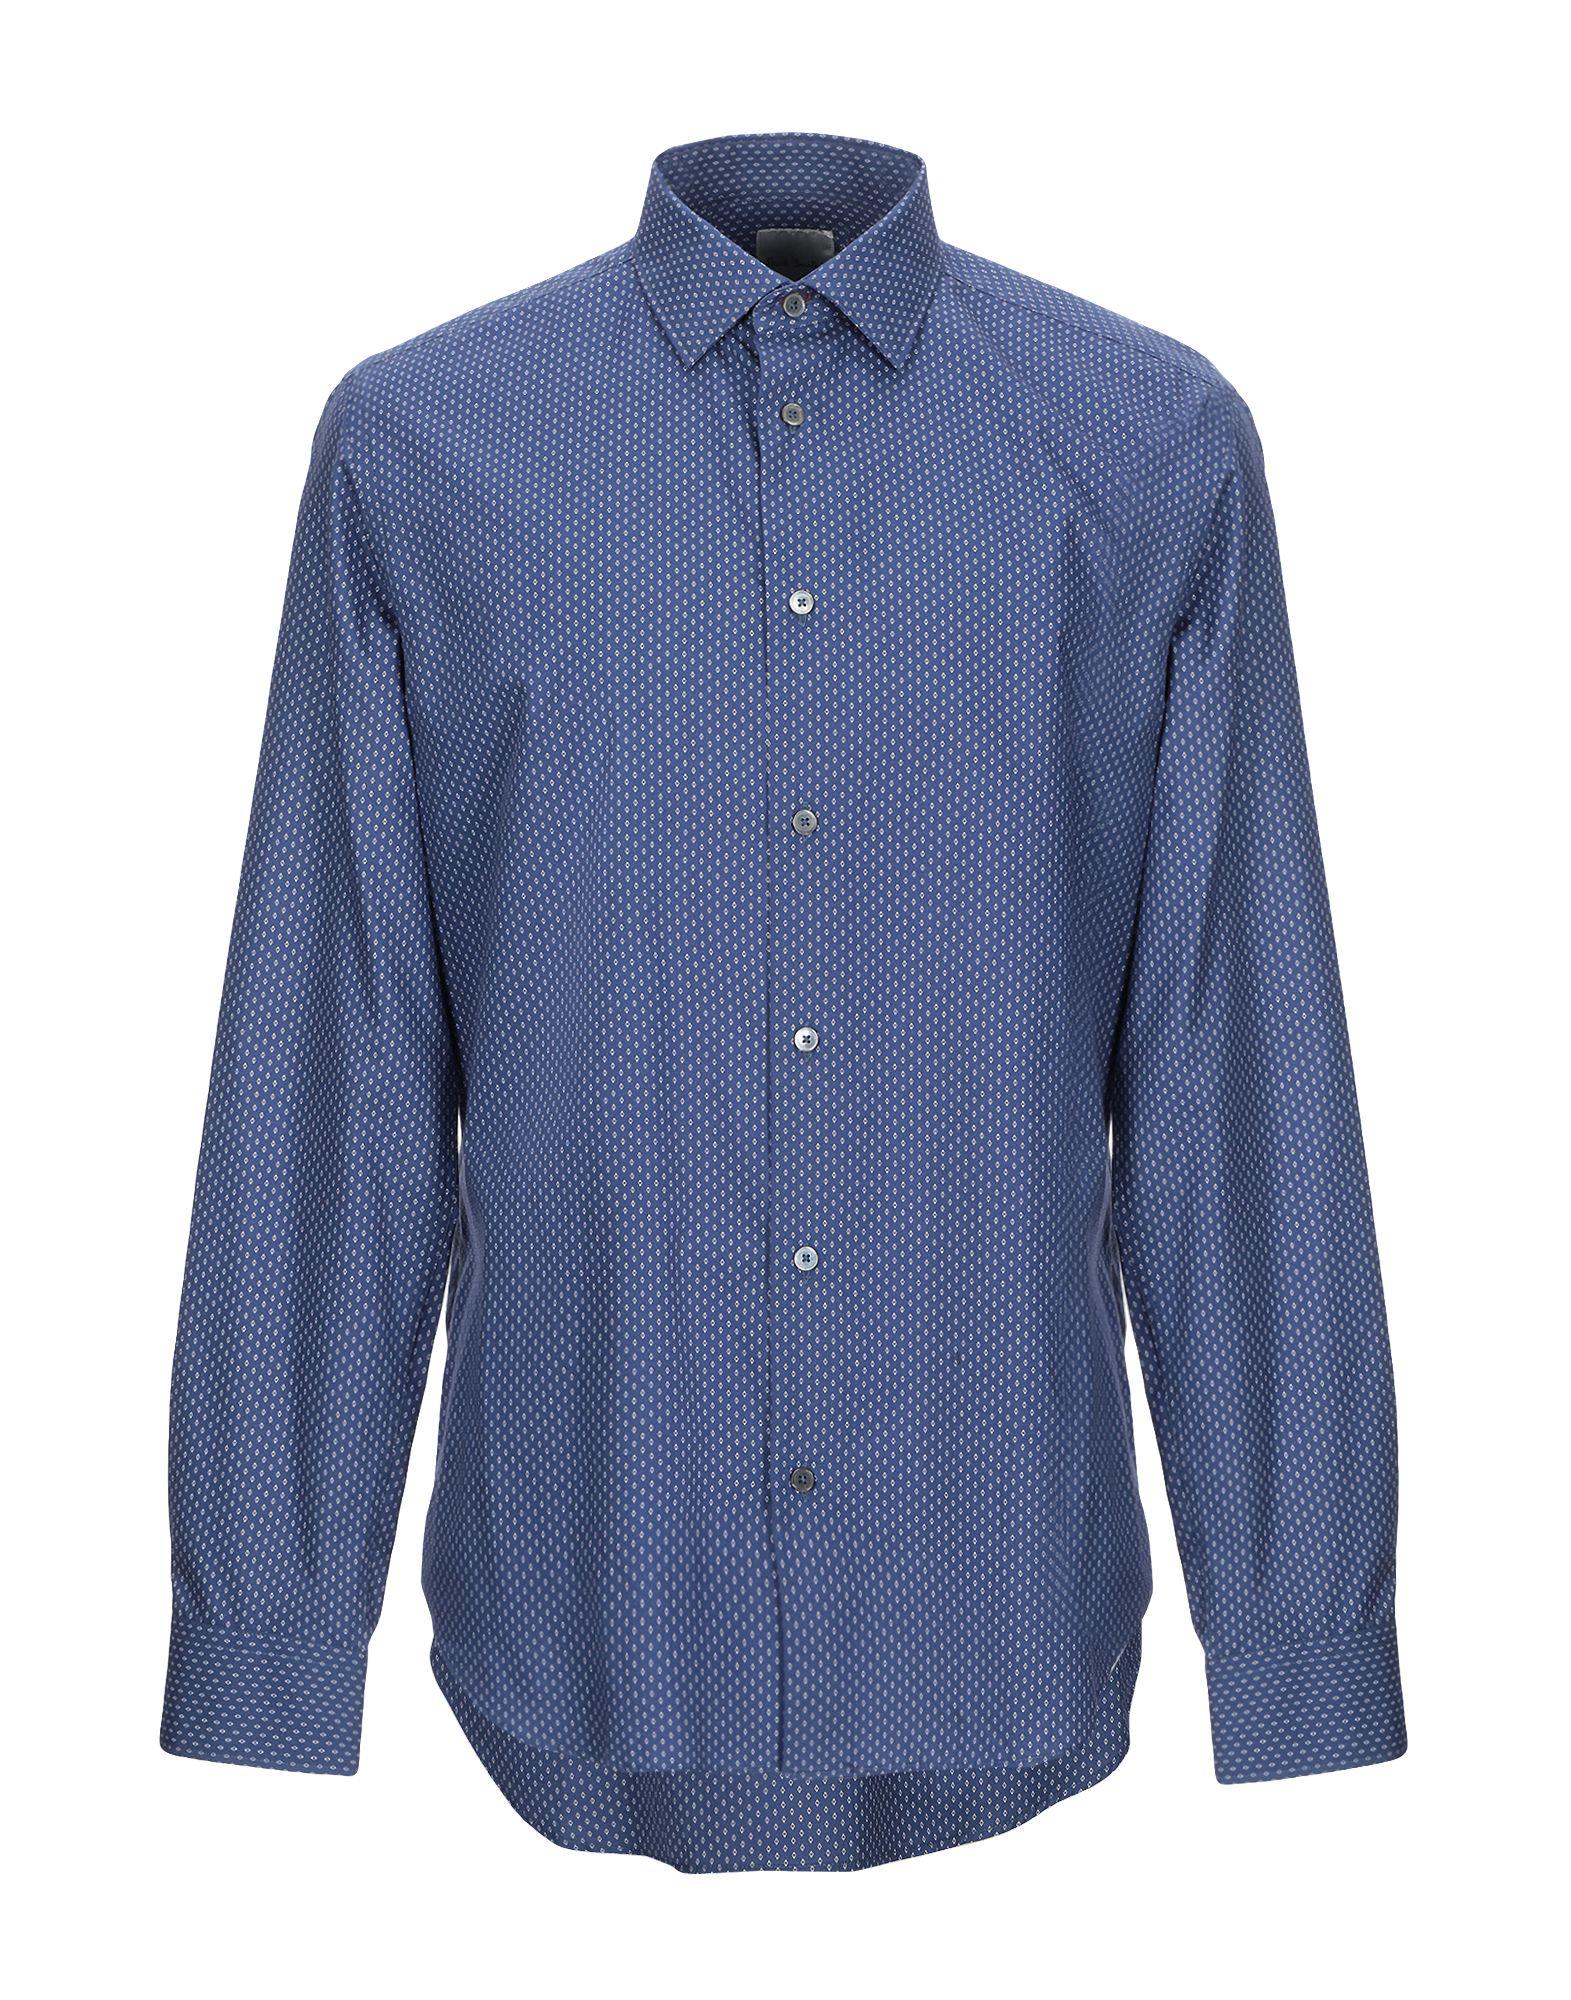 Paul Smith Shirt in Blue for Men - Lyst